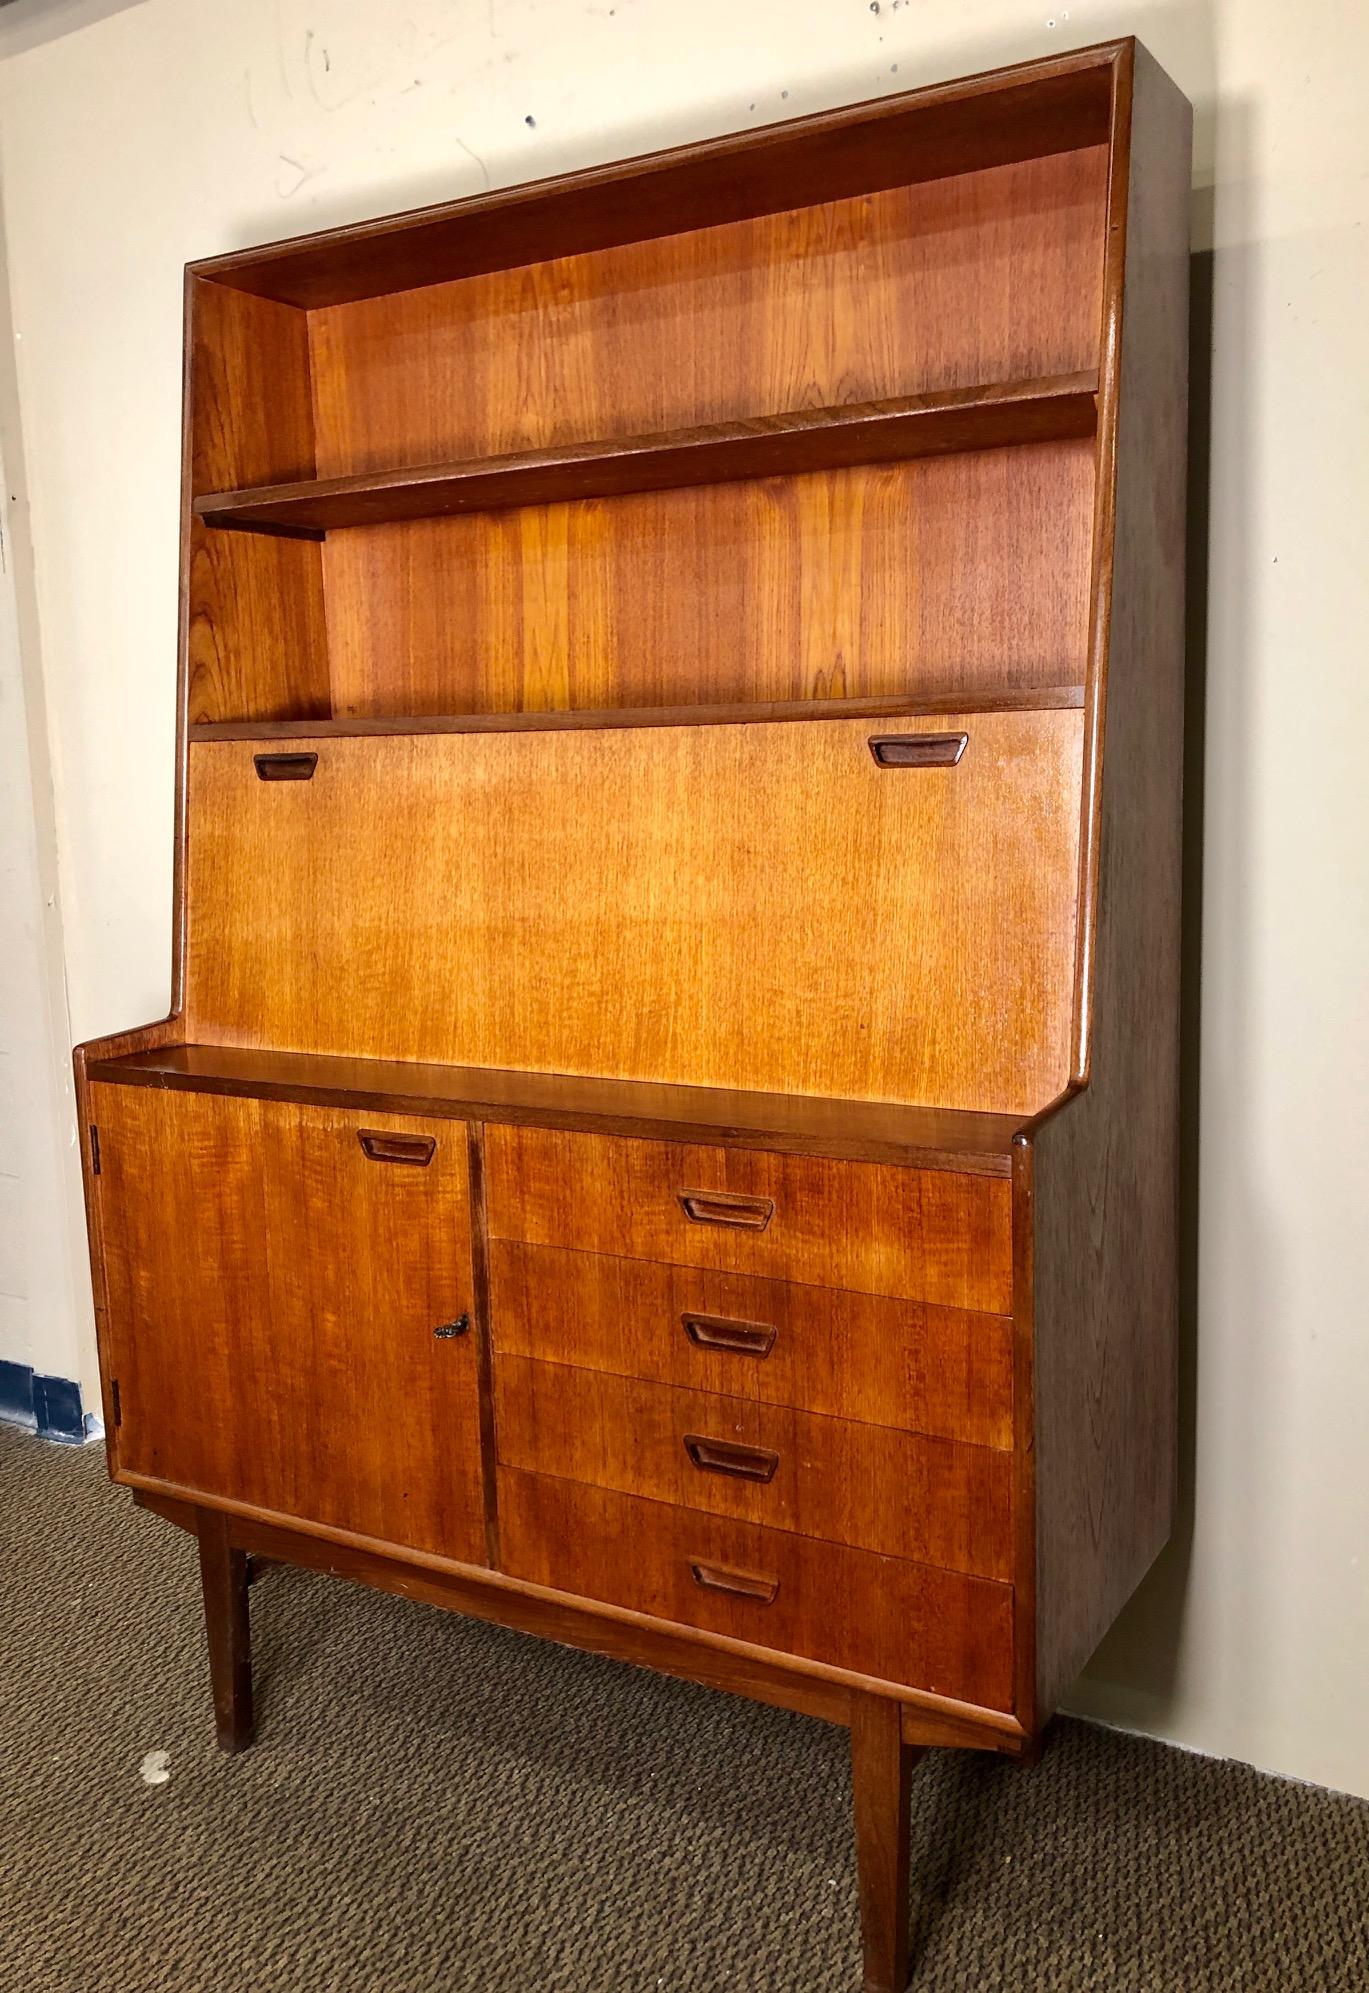 This is a beautiful teak secretary with 4 drawers and a cabinet door with key.
Made by Turnidge of London. Original label in the top drawer.
Condition:
Very good condition over all. Some stains and paper residue in side the drawers. Some light